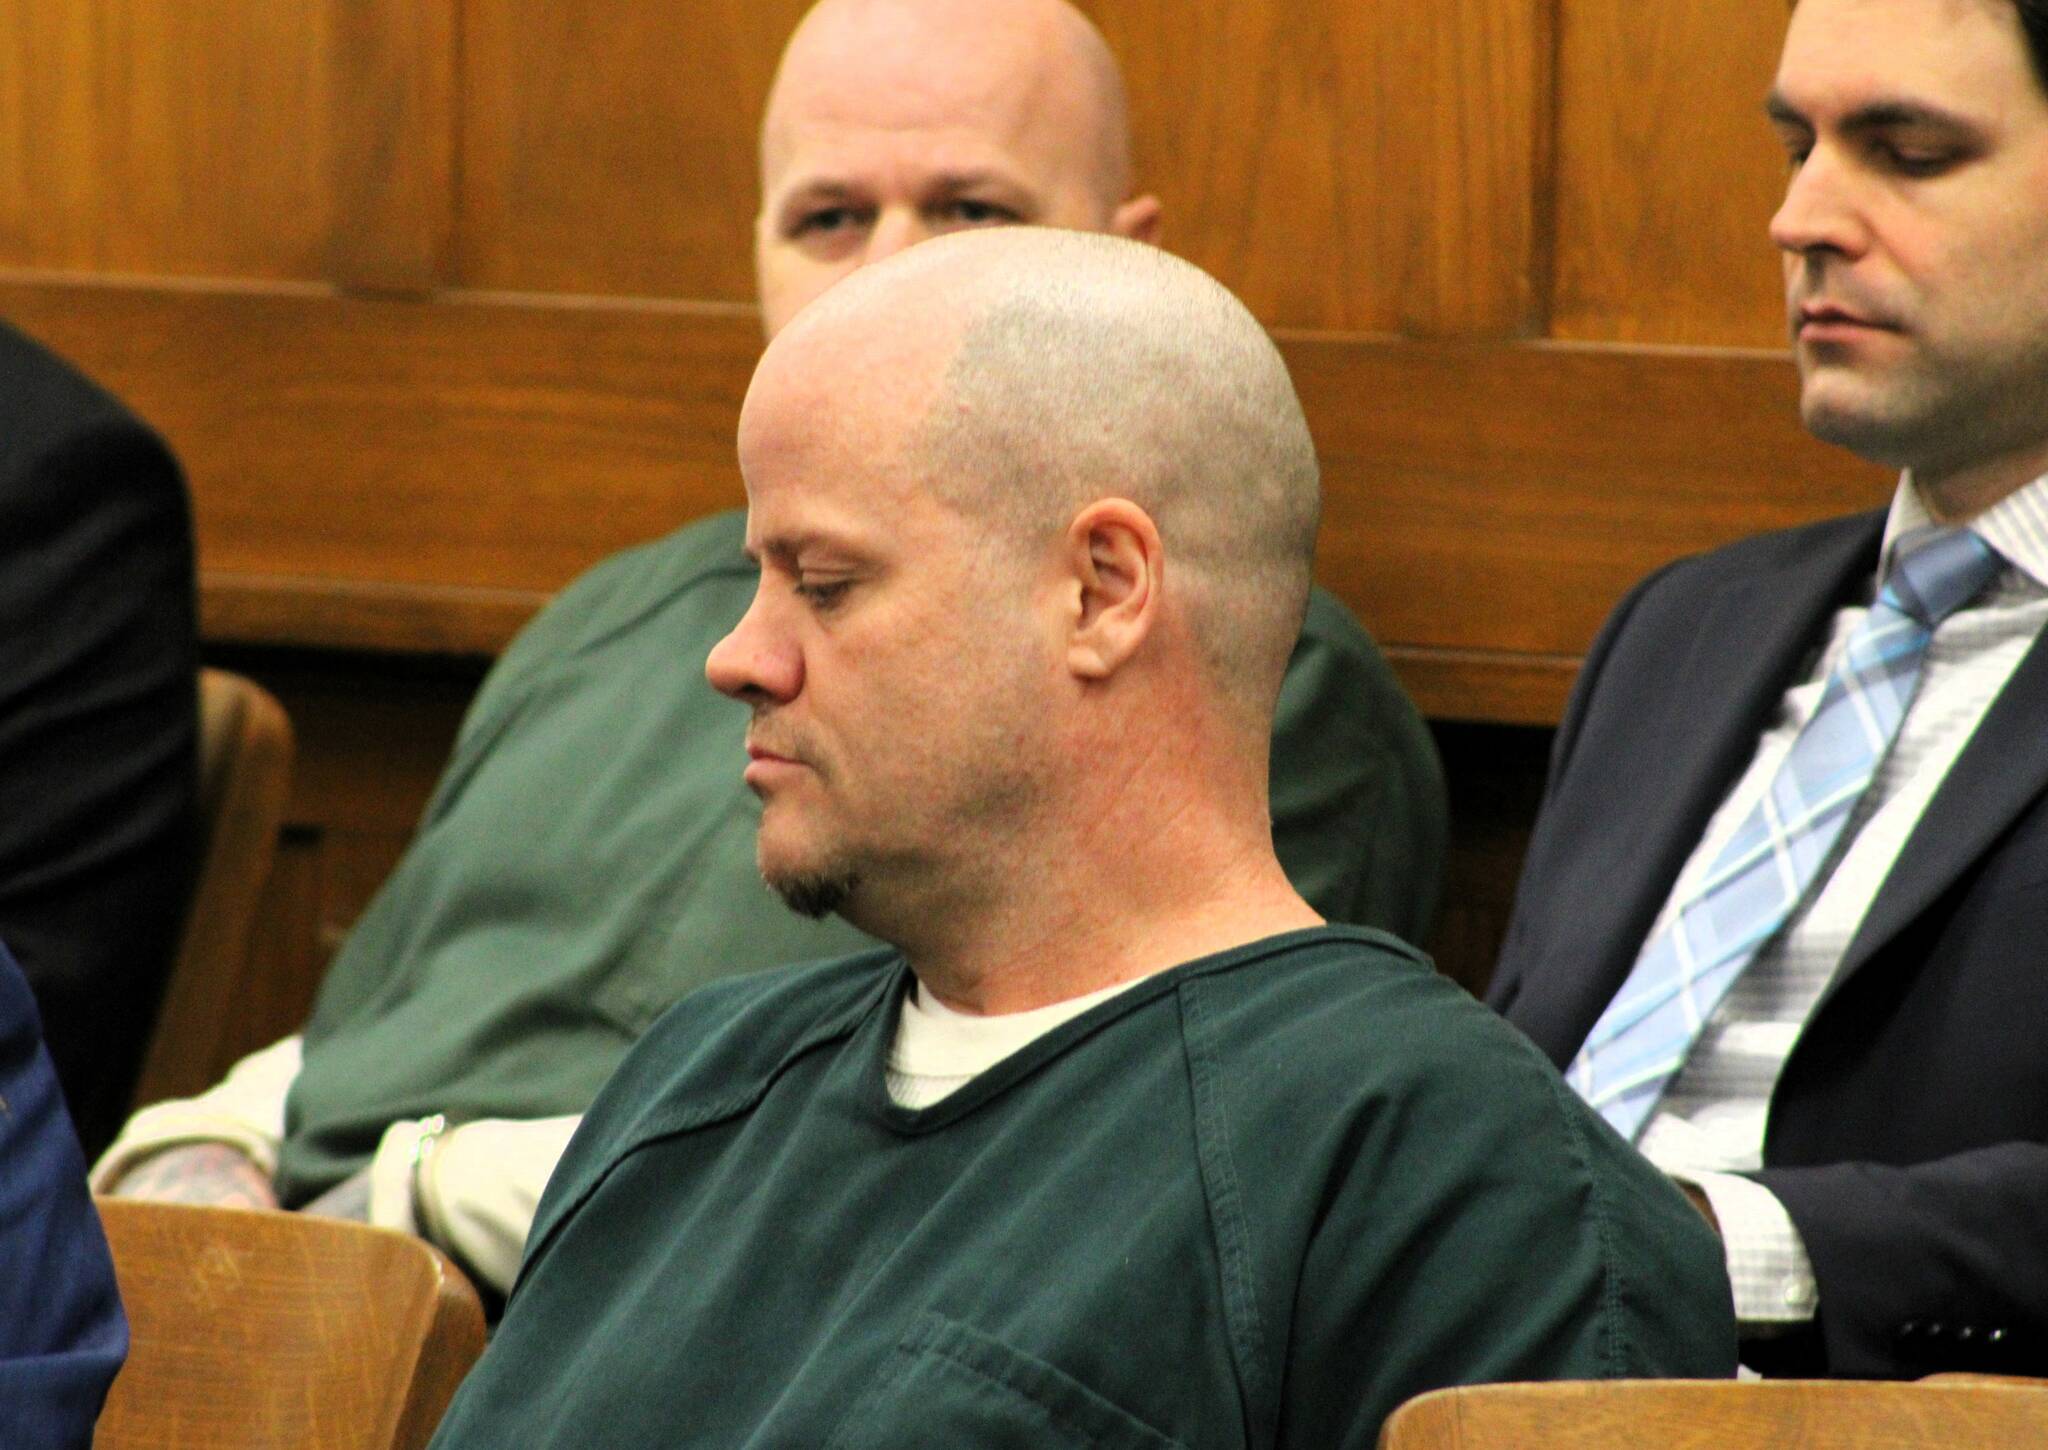 Elisha Meyer/Kitsap News Group photos
Johnny Watson and his brother Robert sitting behind him to his right hear statements from the victims families before receiving their sentences.